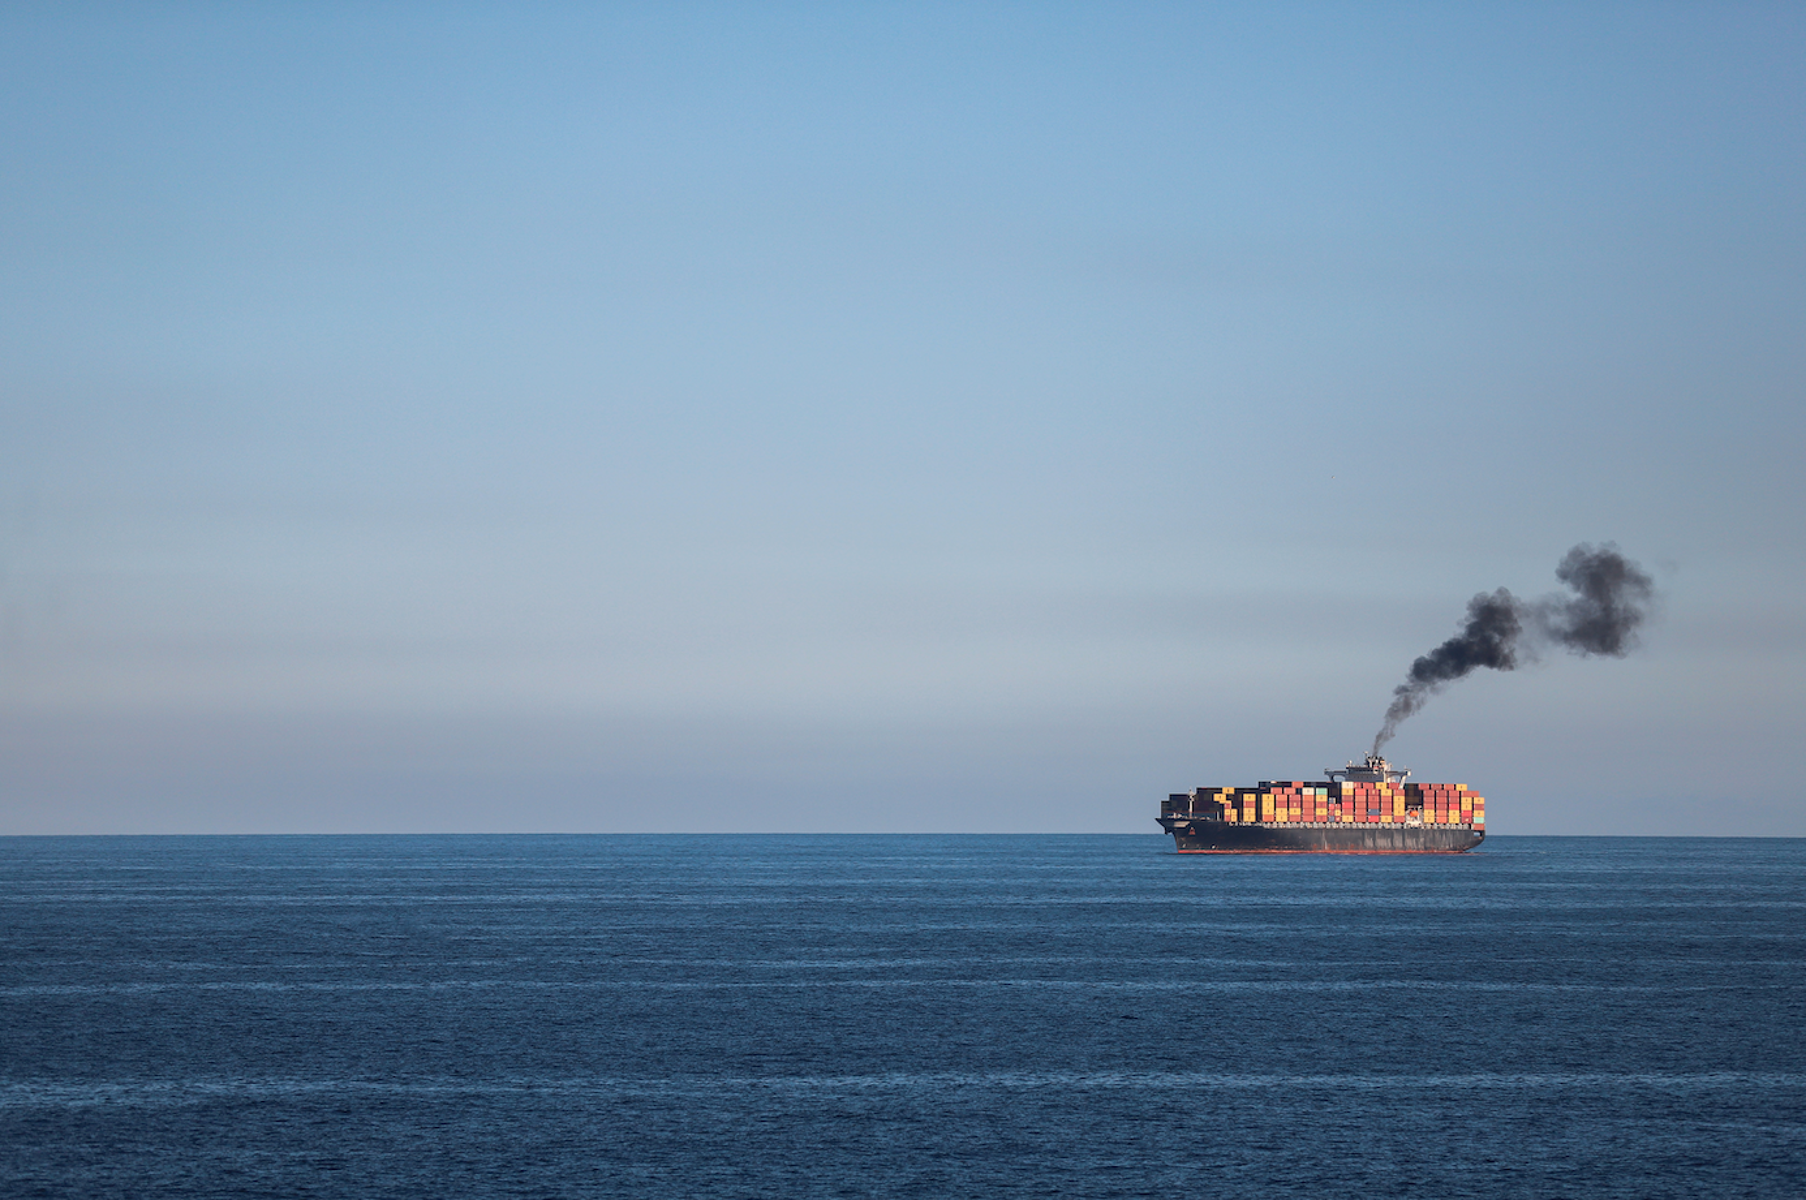 Many freighters run on heavy fuel oil, a cheap but highly toxic waste product from refineries that produces a lot of CO2. 